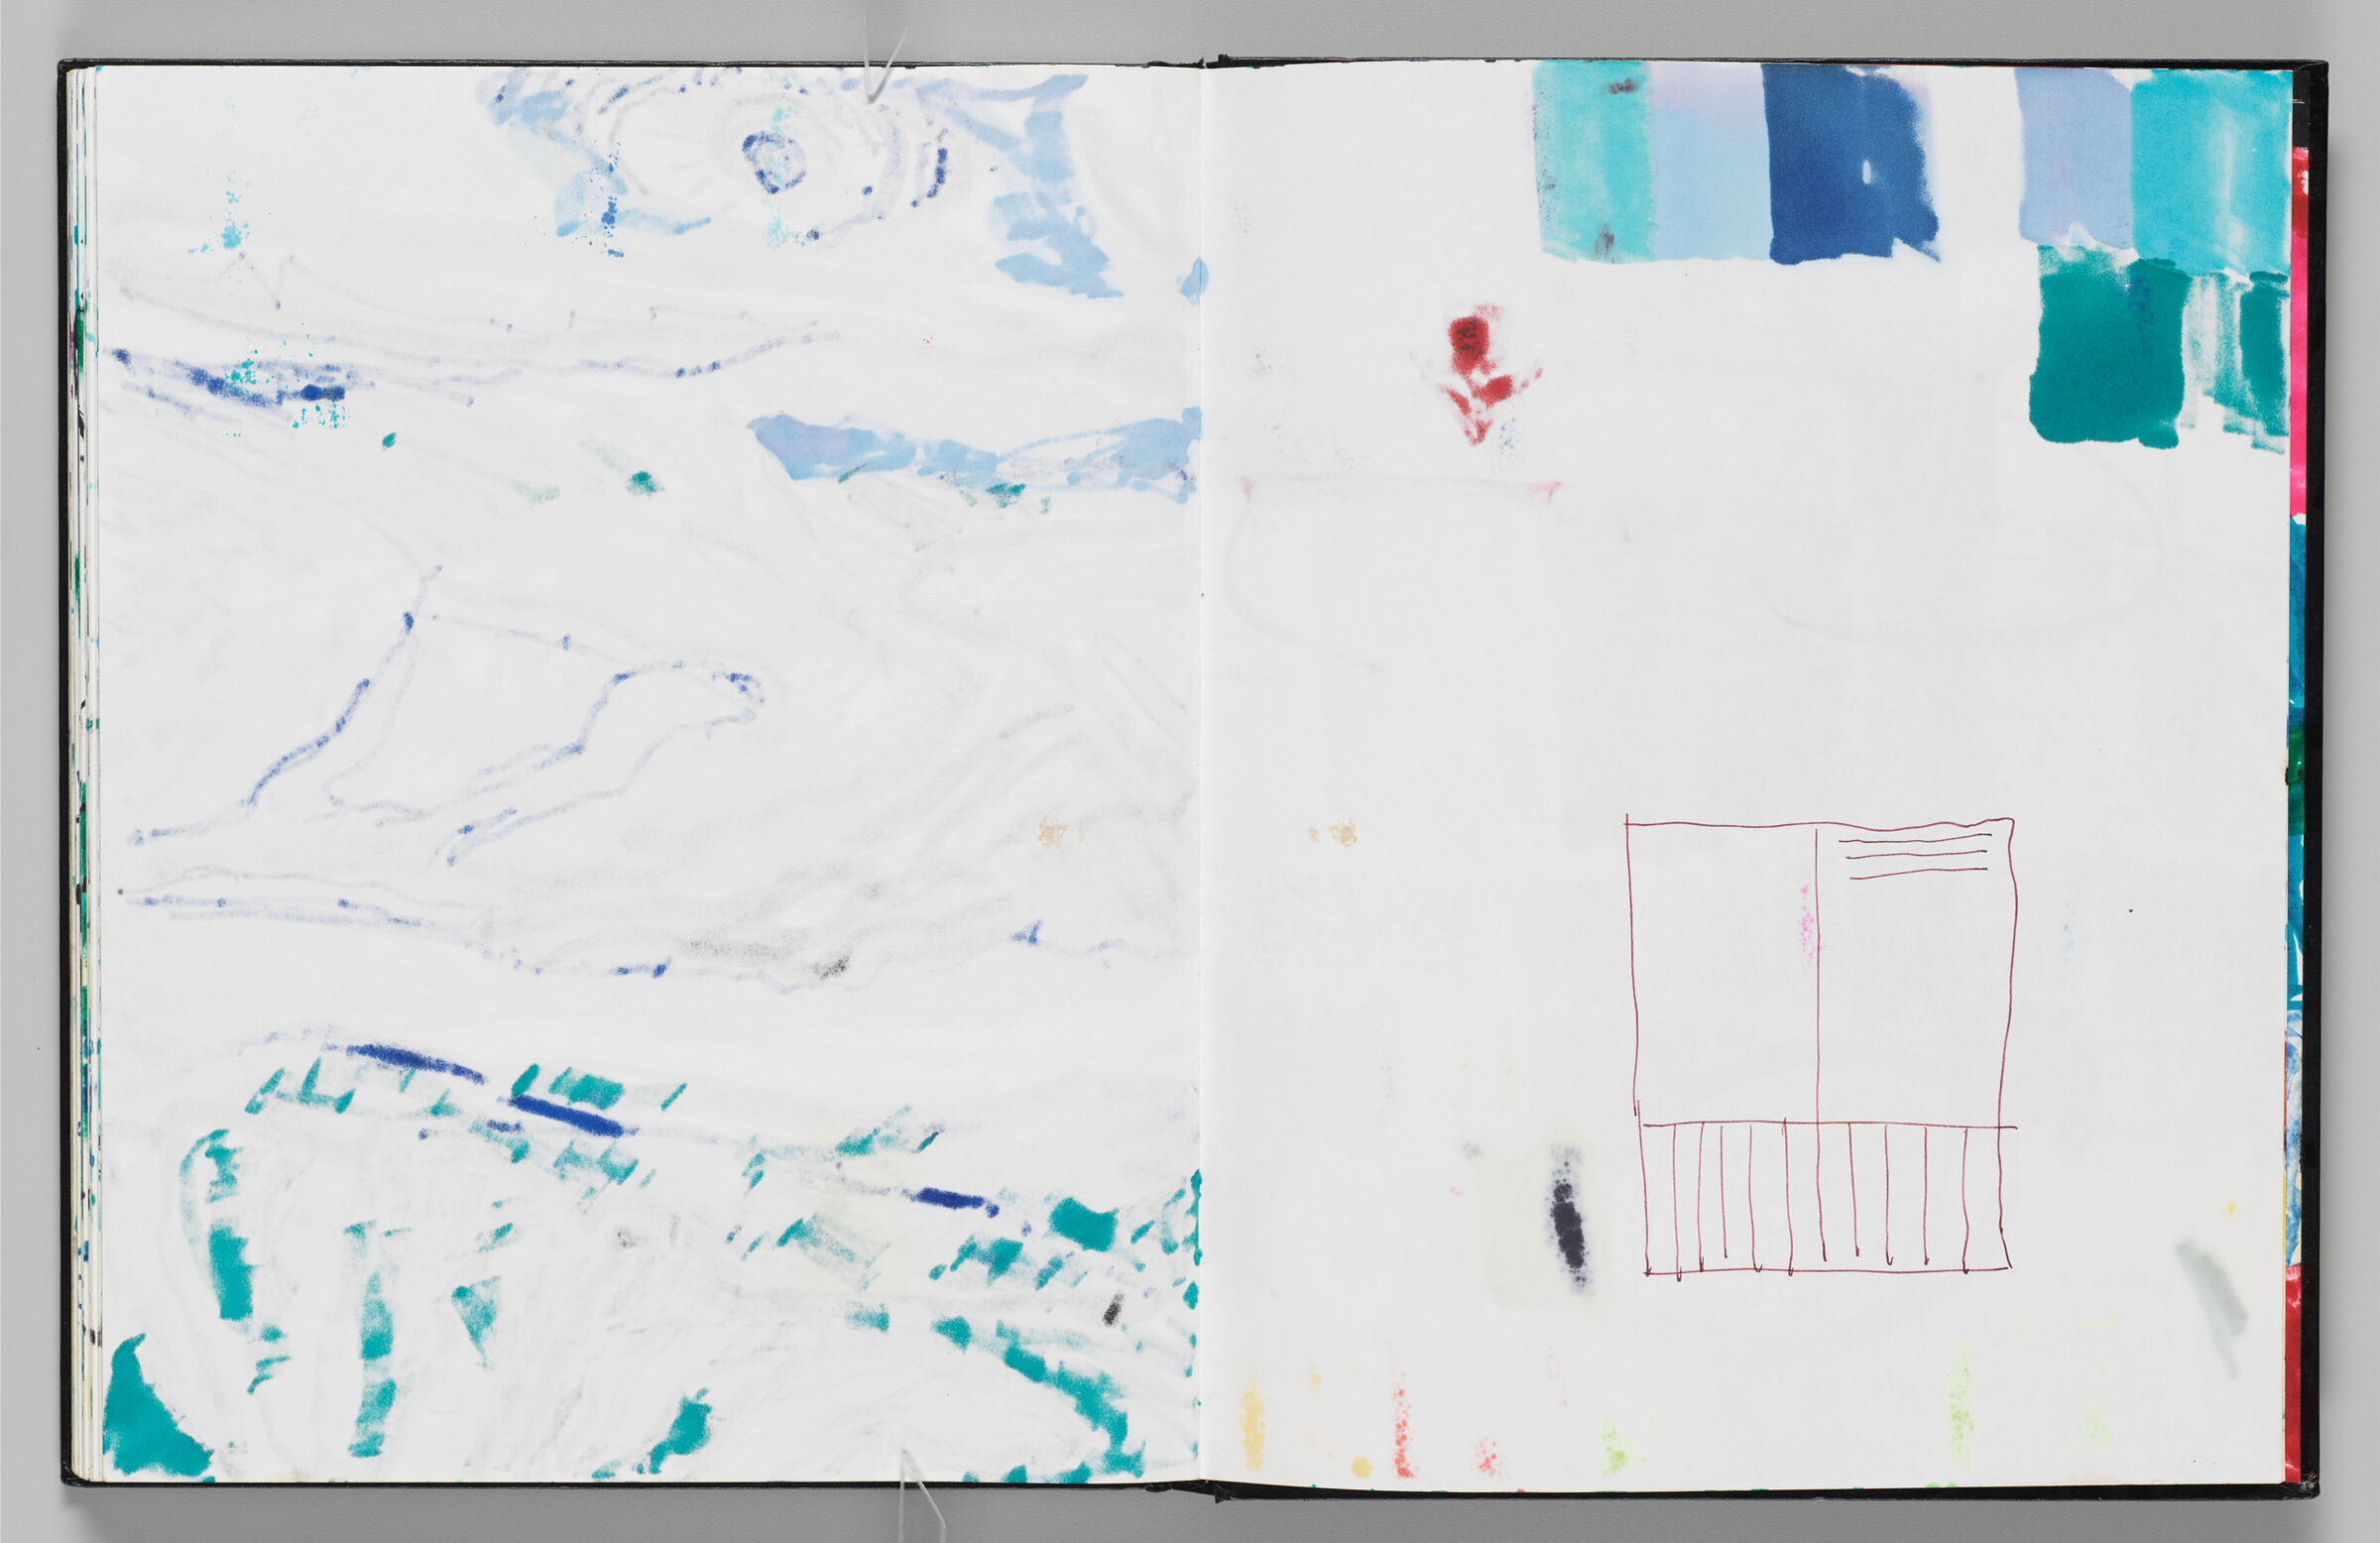 Untitled (Bleed-Through Of Previous Page, Left Page); Untitled (Bleed-Through Of Following Page With Line Sketch, Right Page)